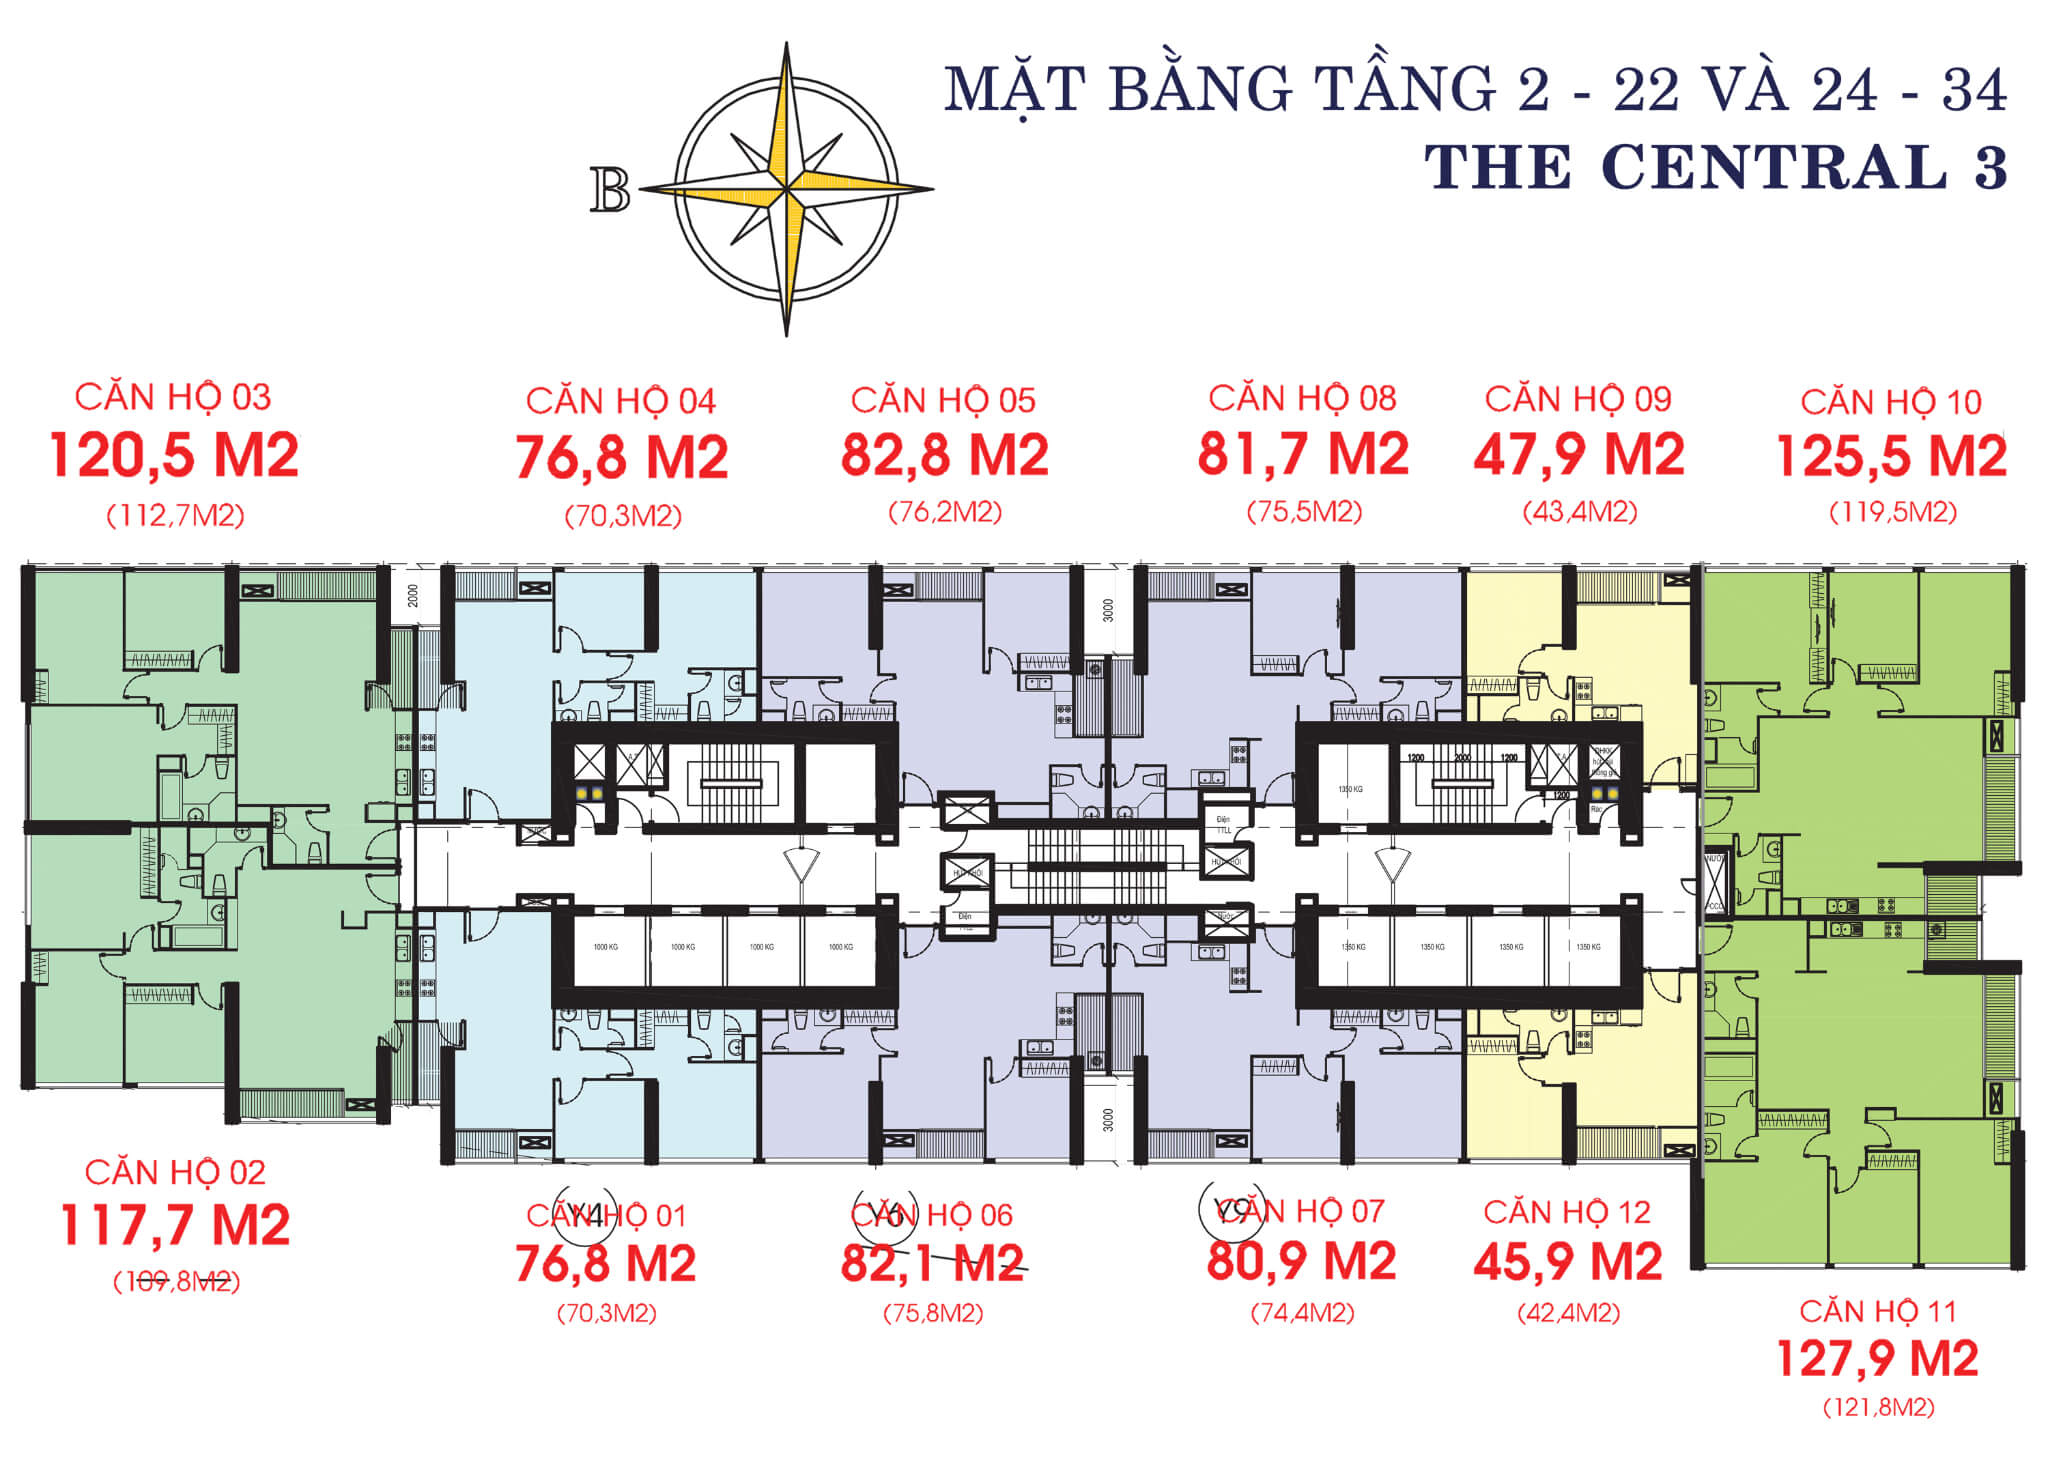 Mặt bằng layout tòa The Central 3 tầng 2-34 tại Vinhomes Central Park